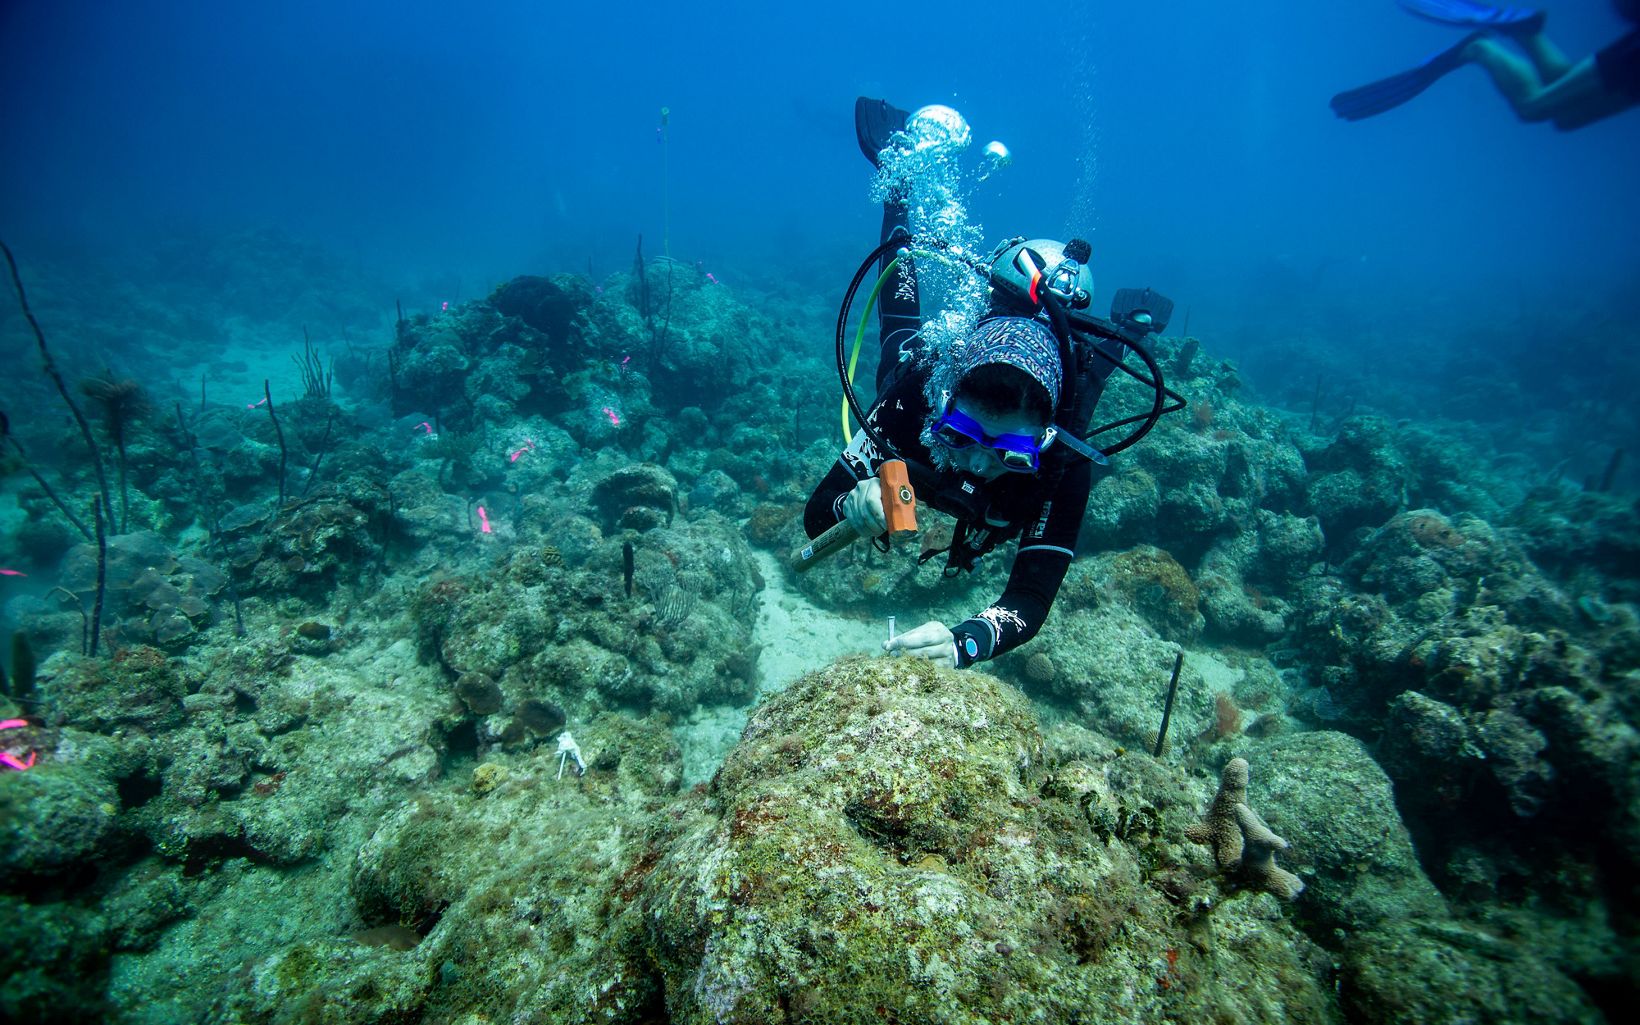 Divers prepare an unhealthy reef for restoration work.